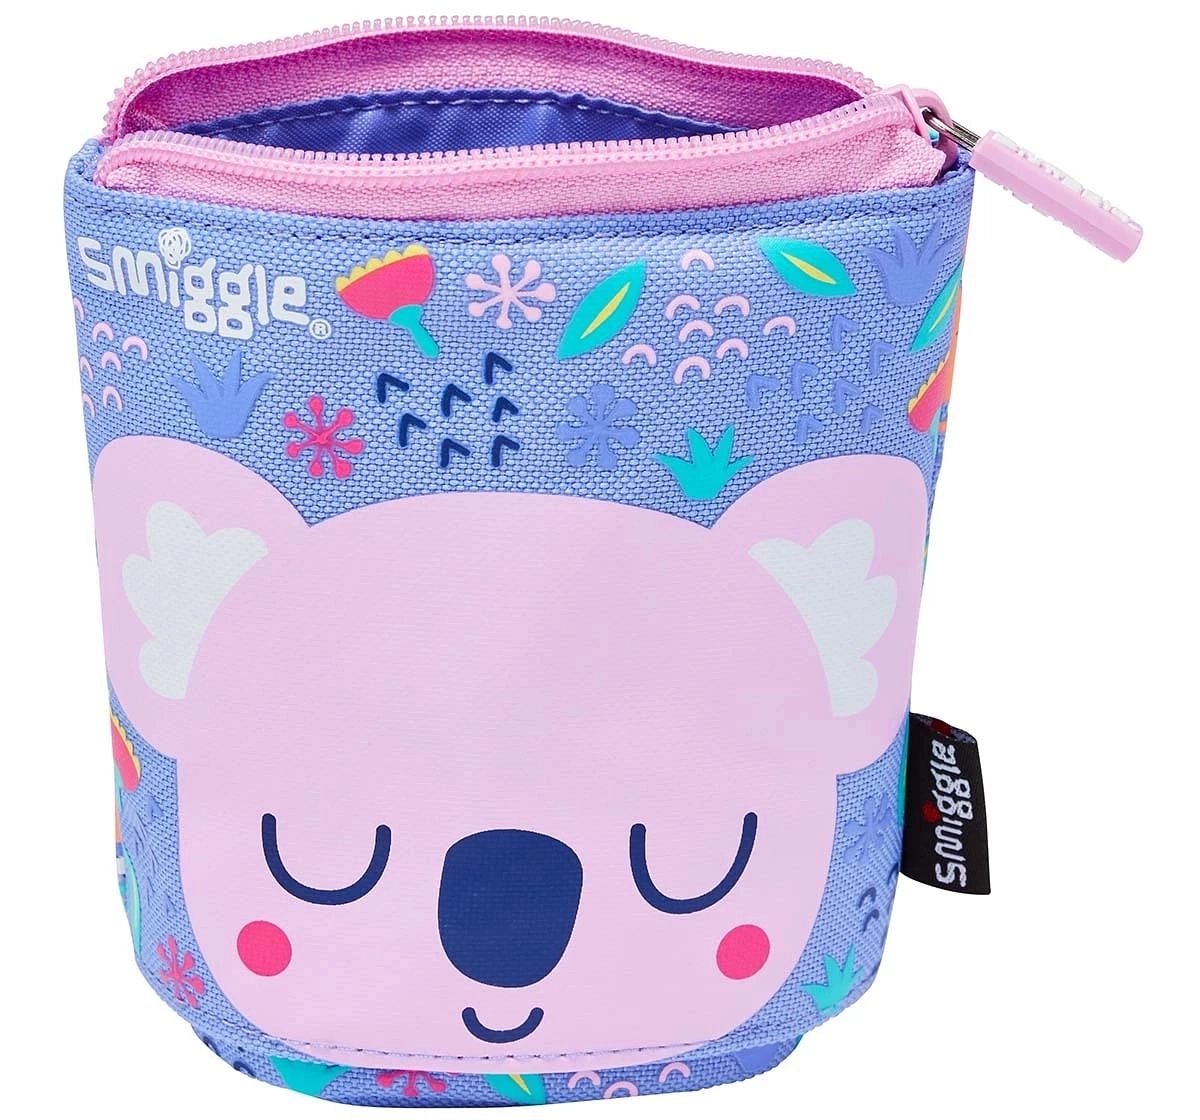 Smiggle Animalia Collection Pencil Pouch Stand Lilac, 4Y+